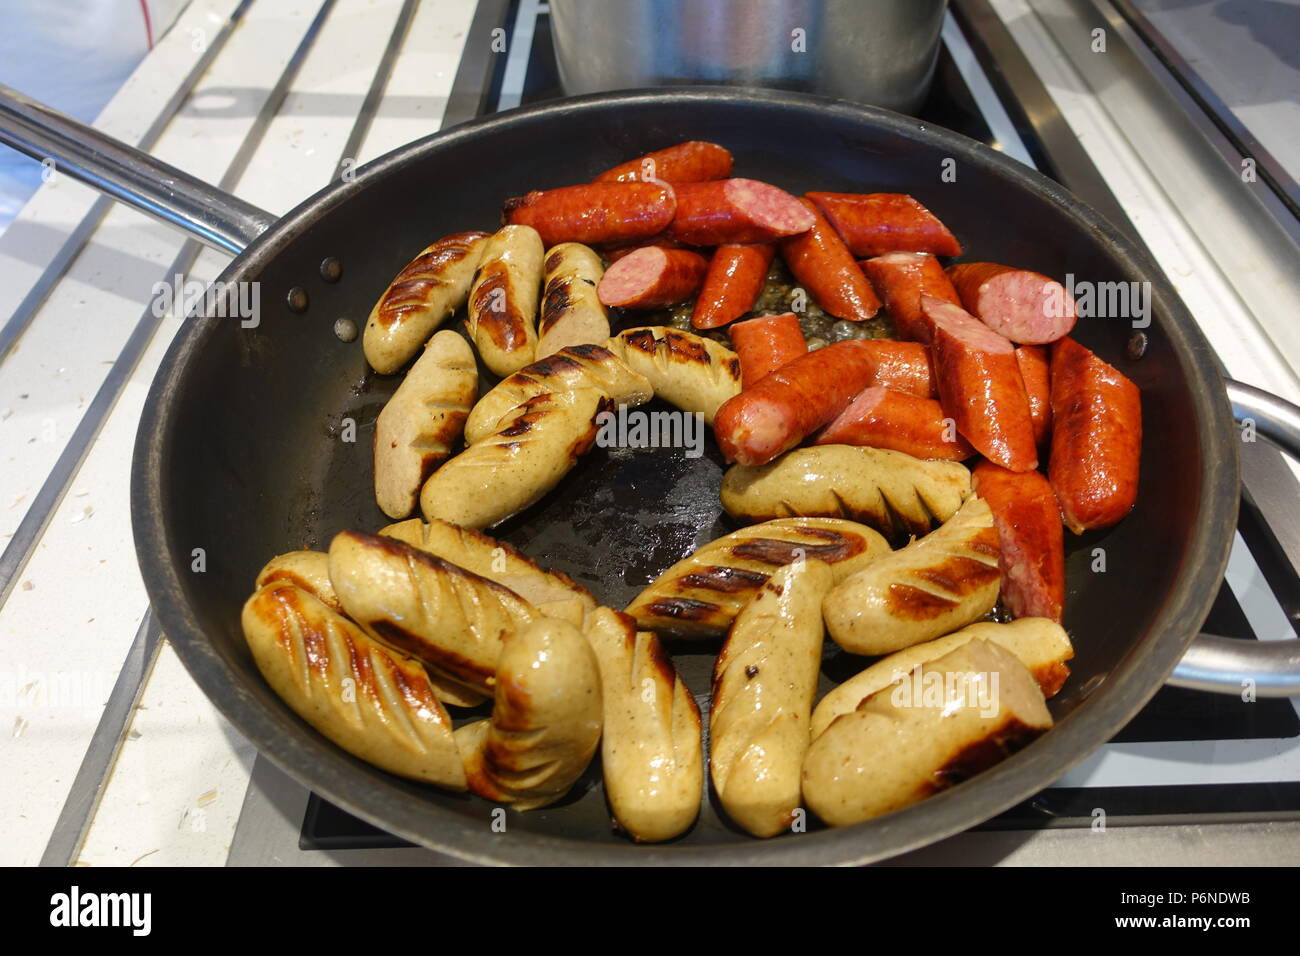 Austro-Bavarian sausages sizzling on the stove Stock Photo